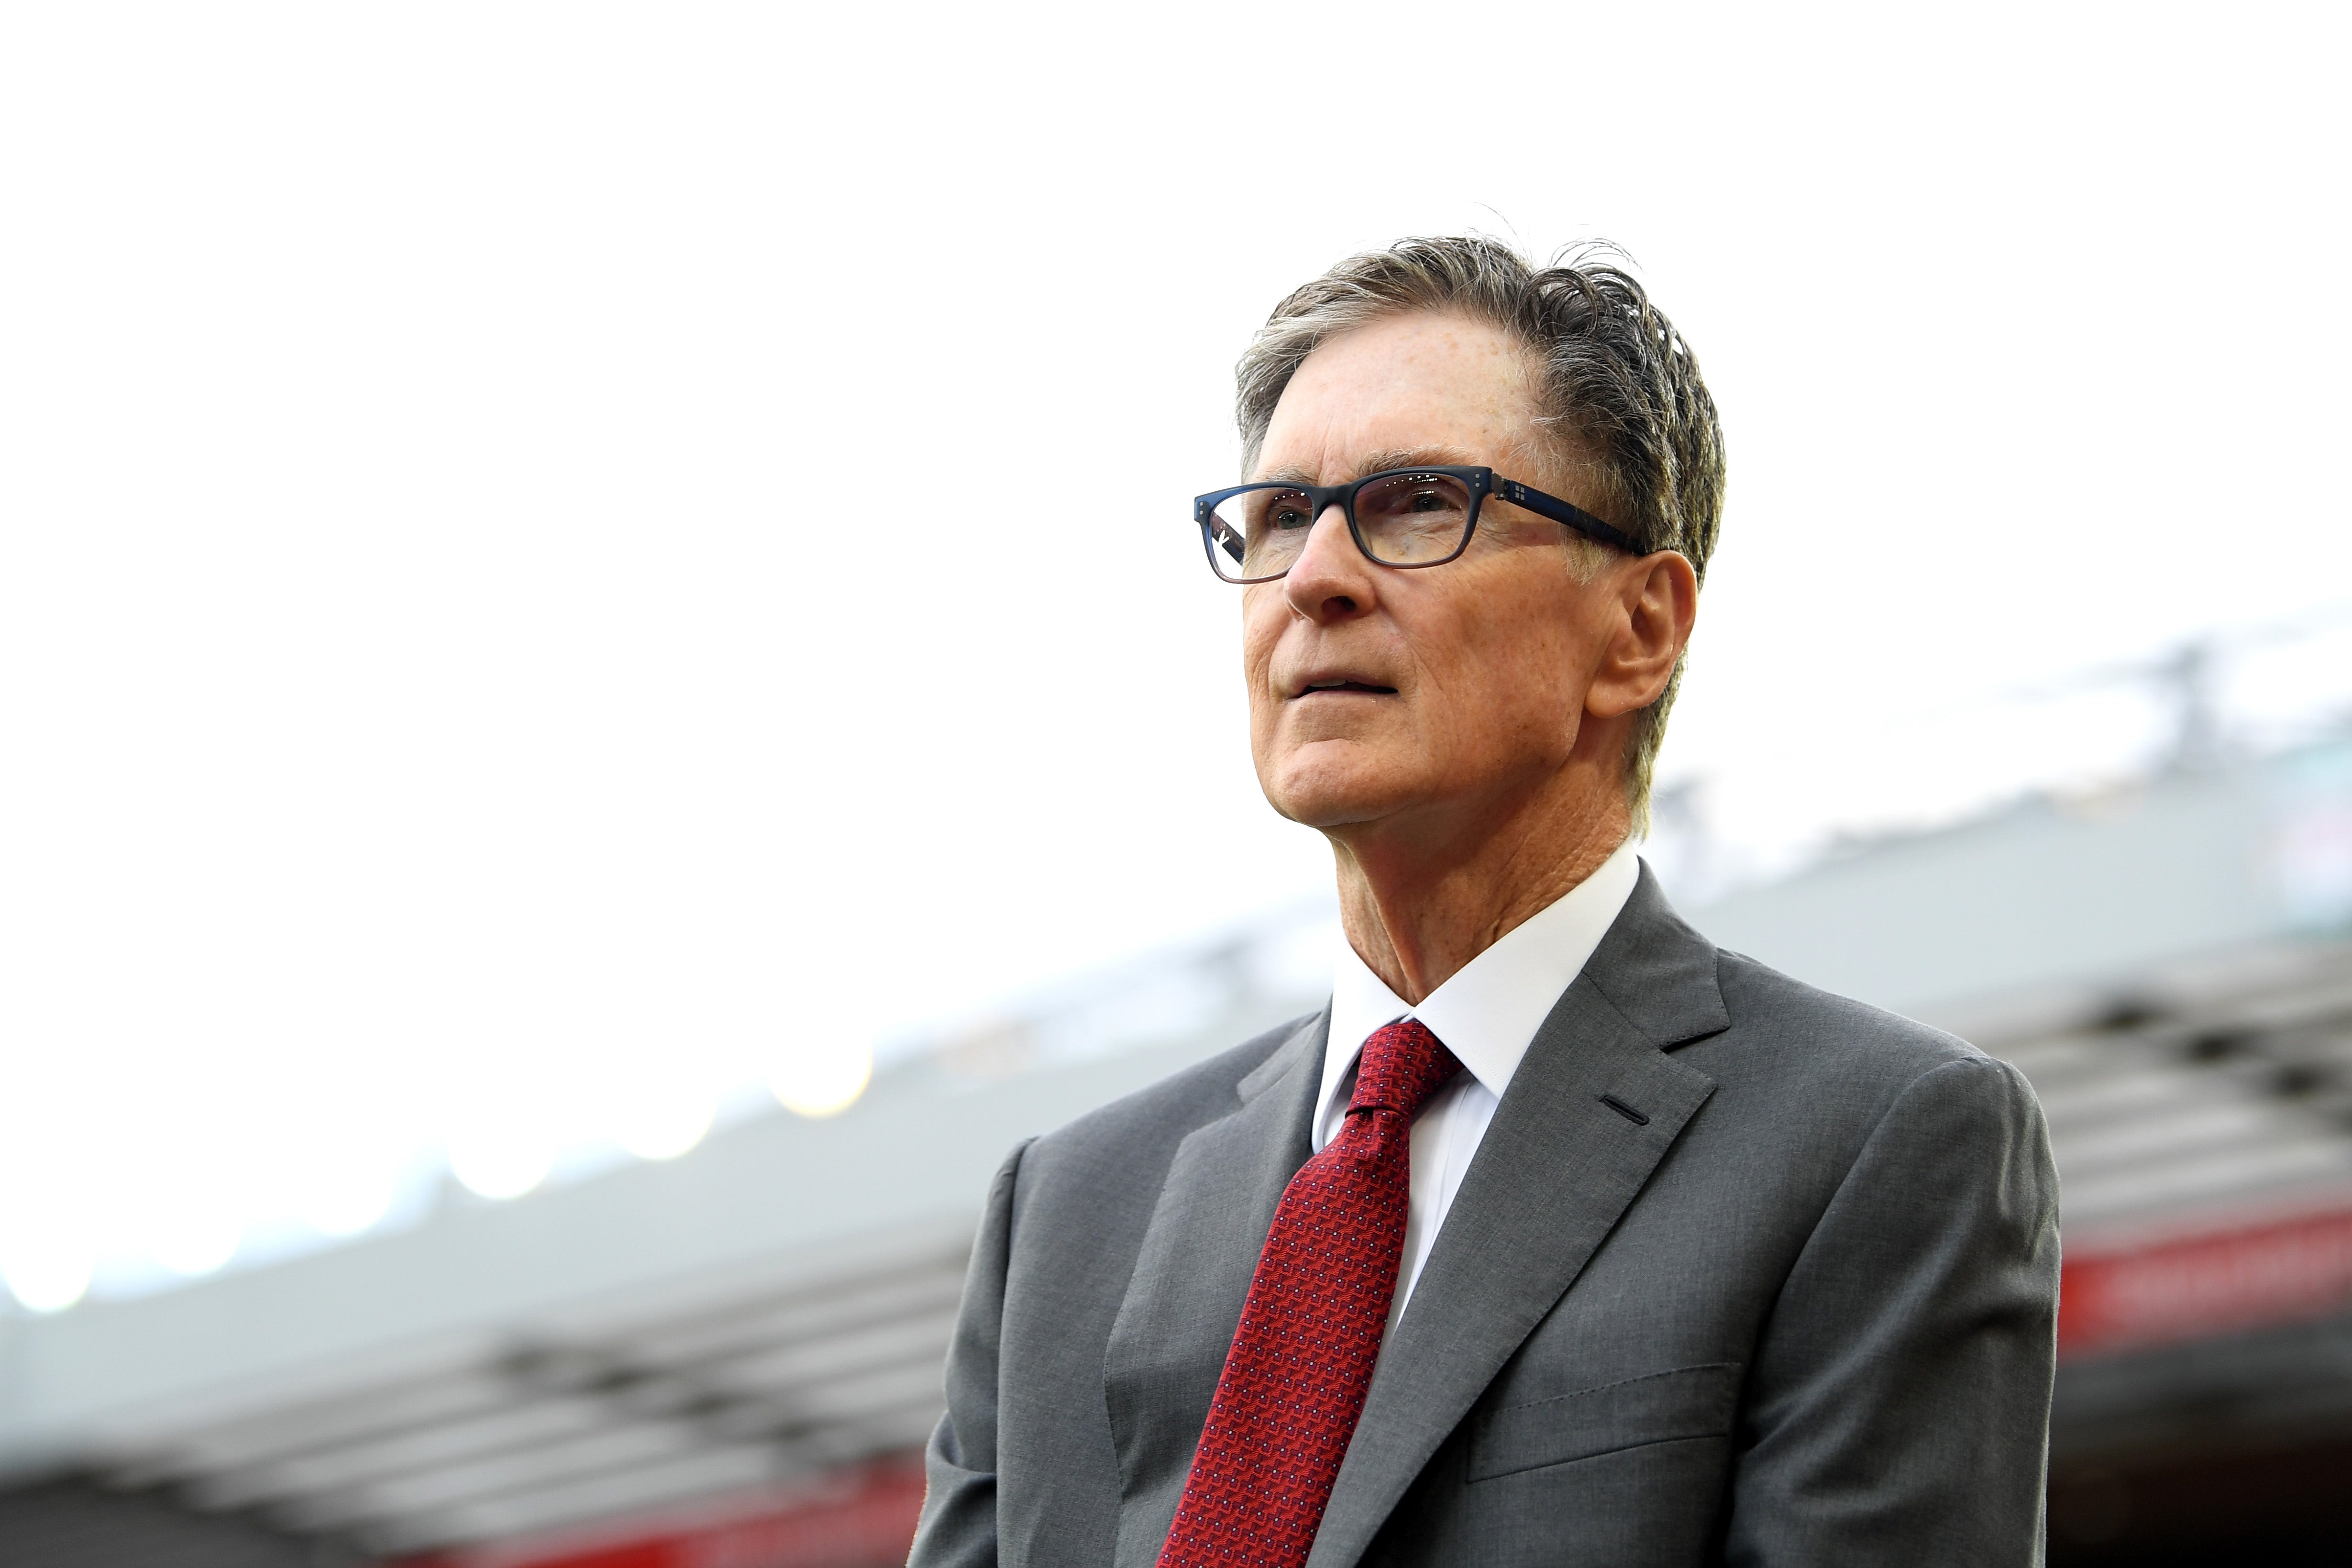 Liverpool owner John W Henry has been at the forefront of plans to revolutionise English football